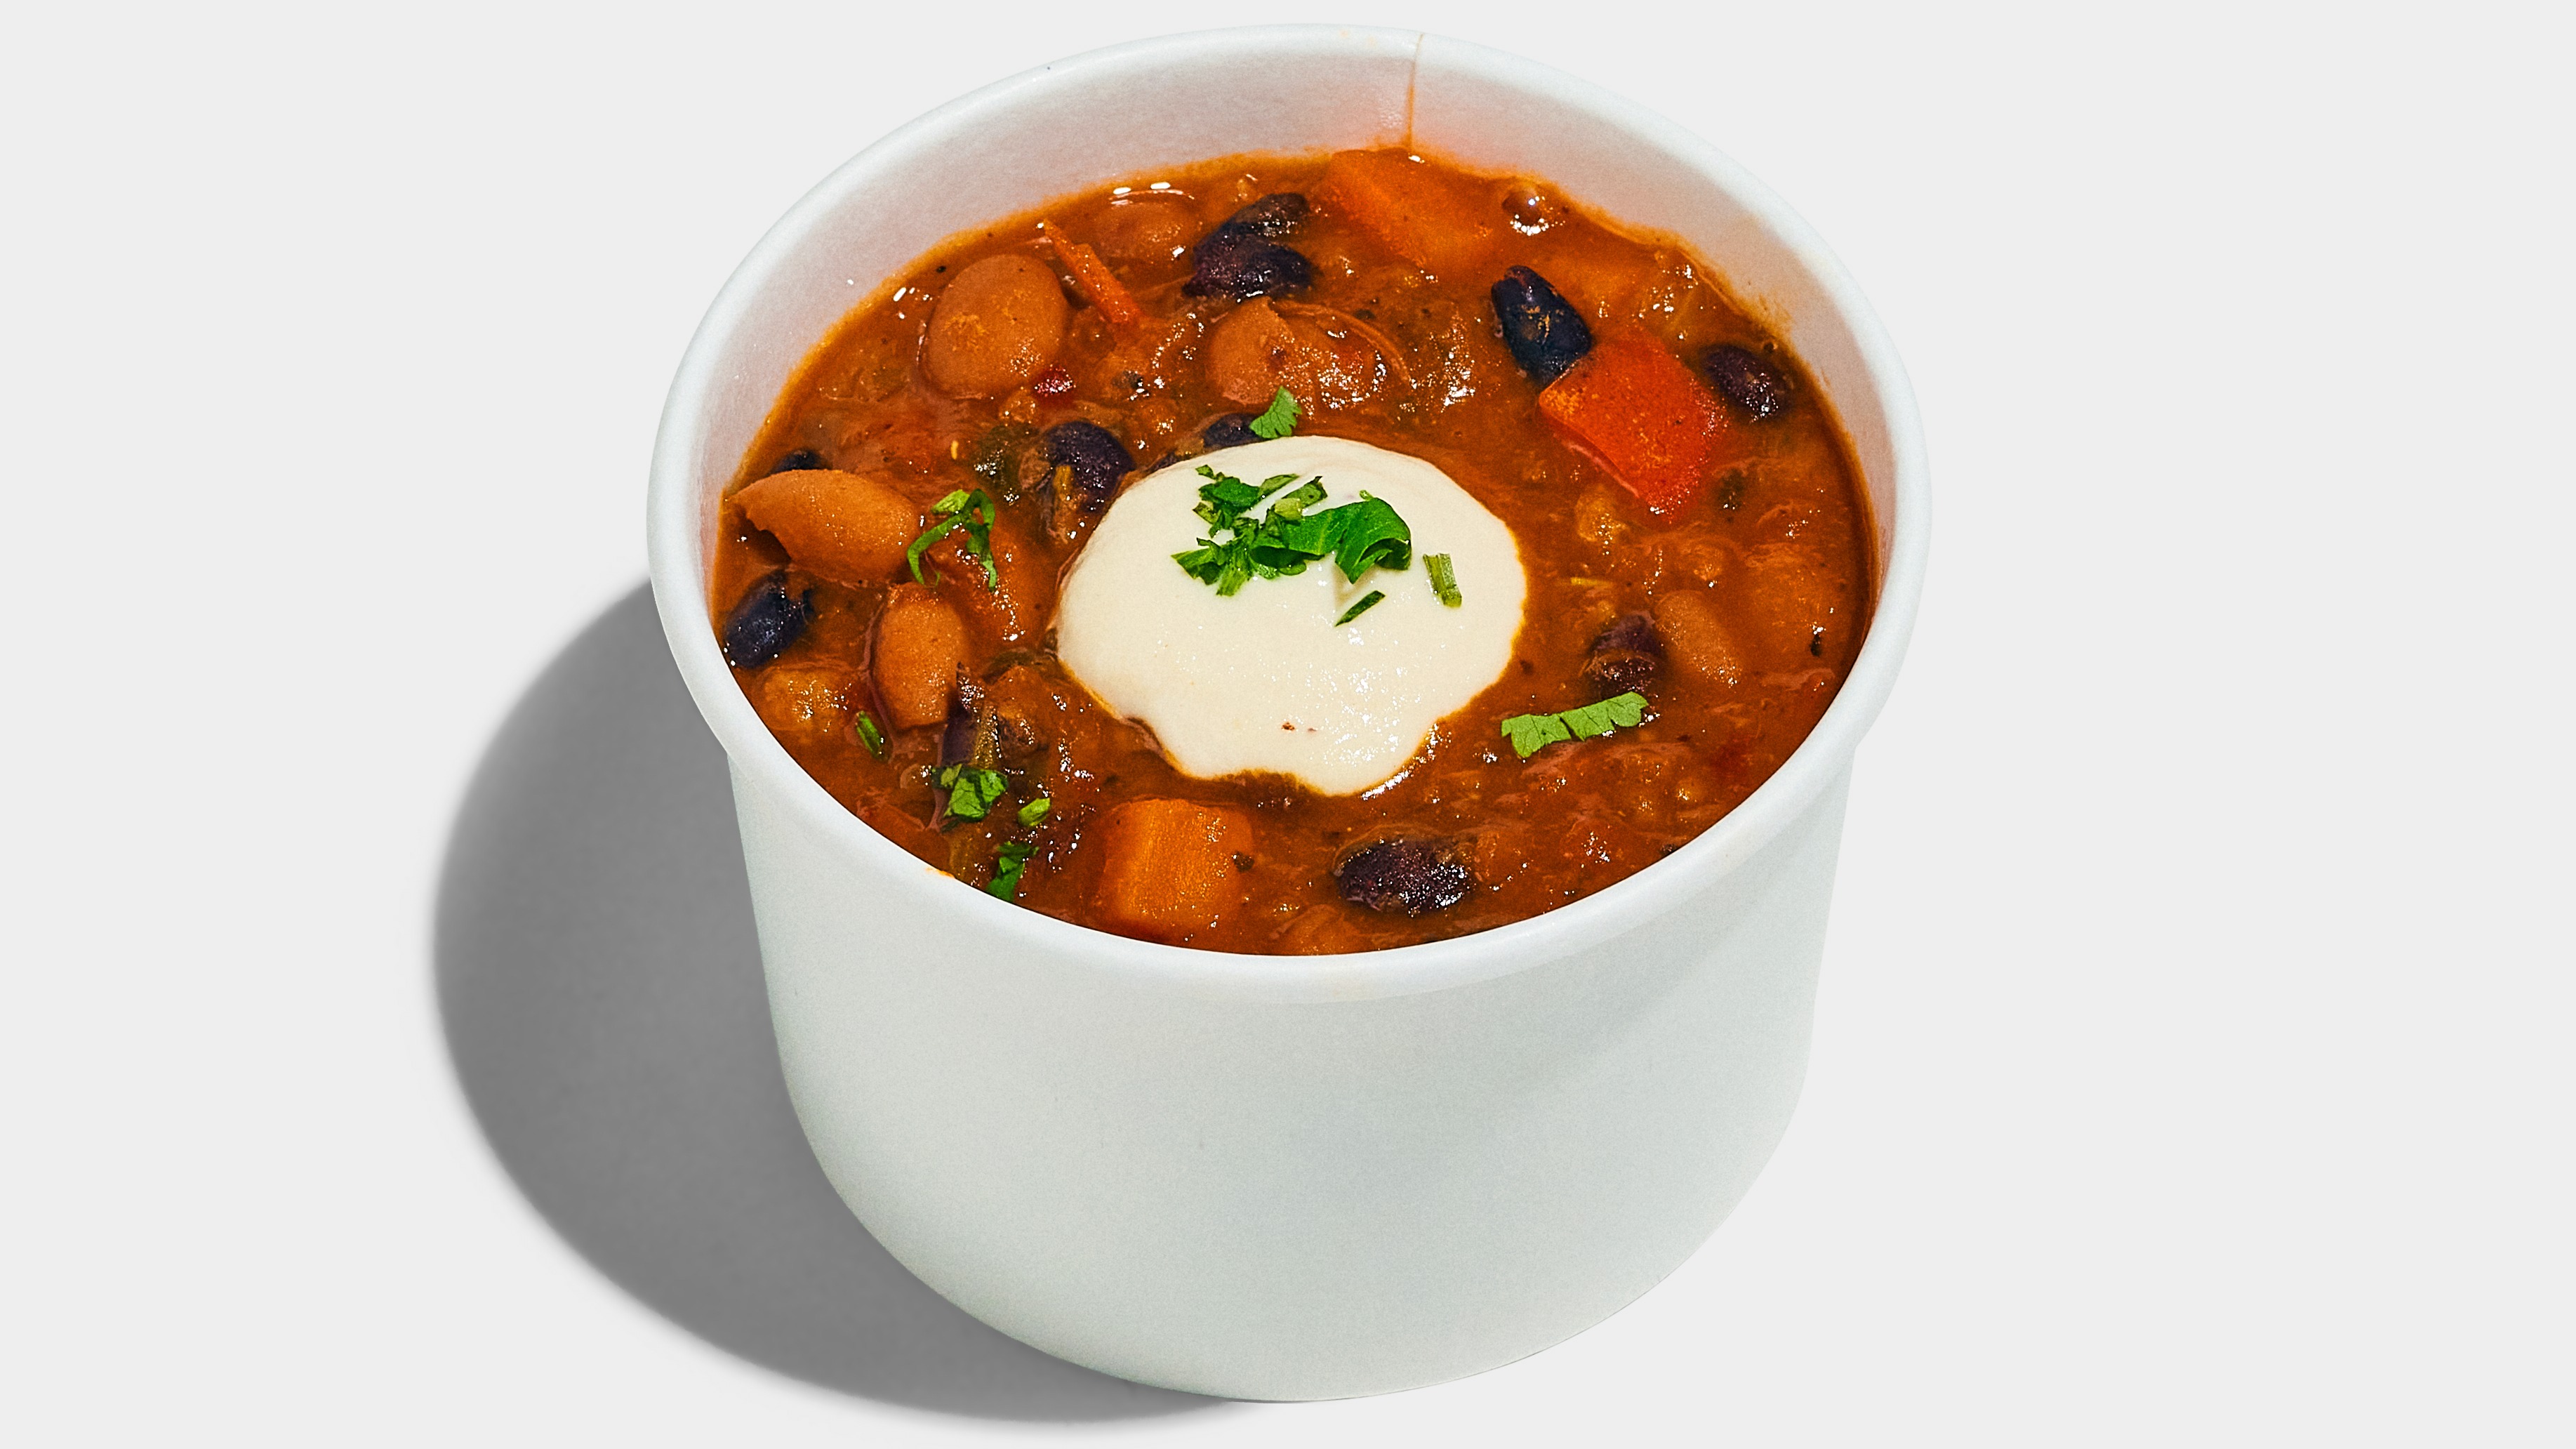 Large Two Bean Chili with Cashew Cream